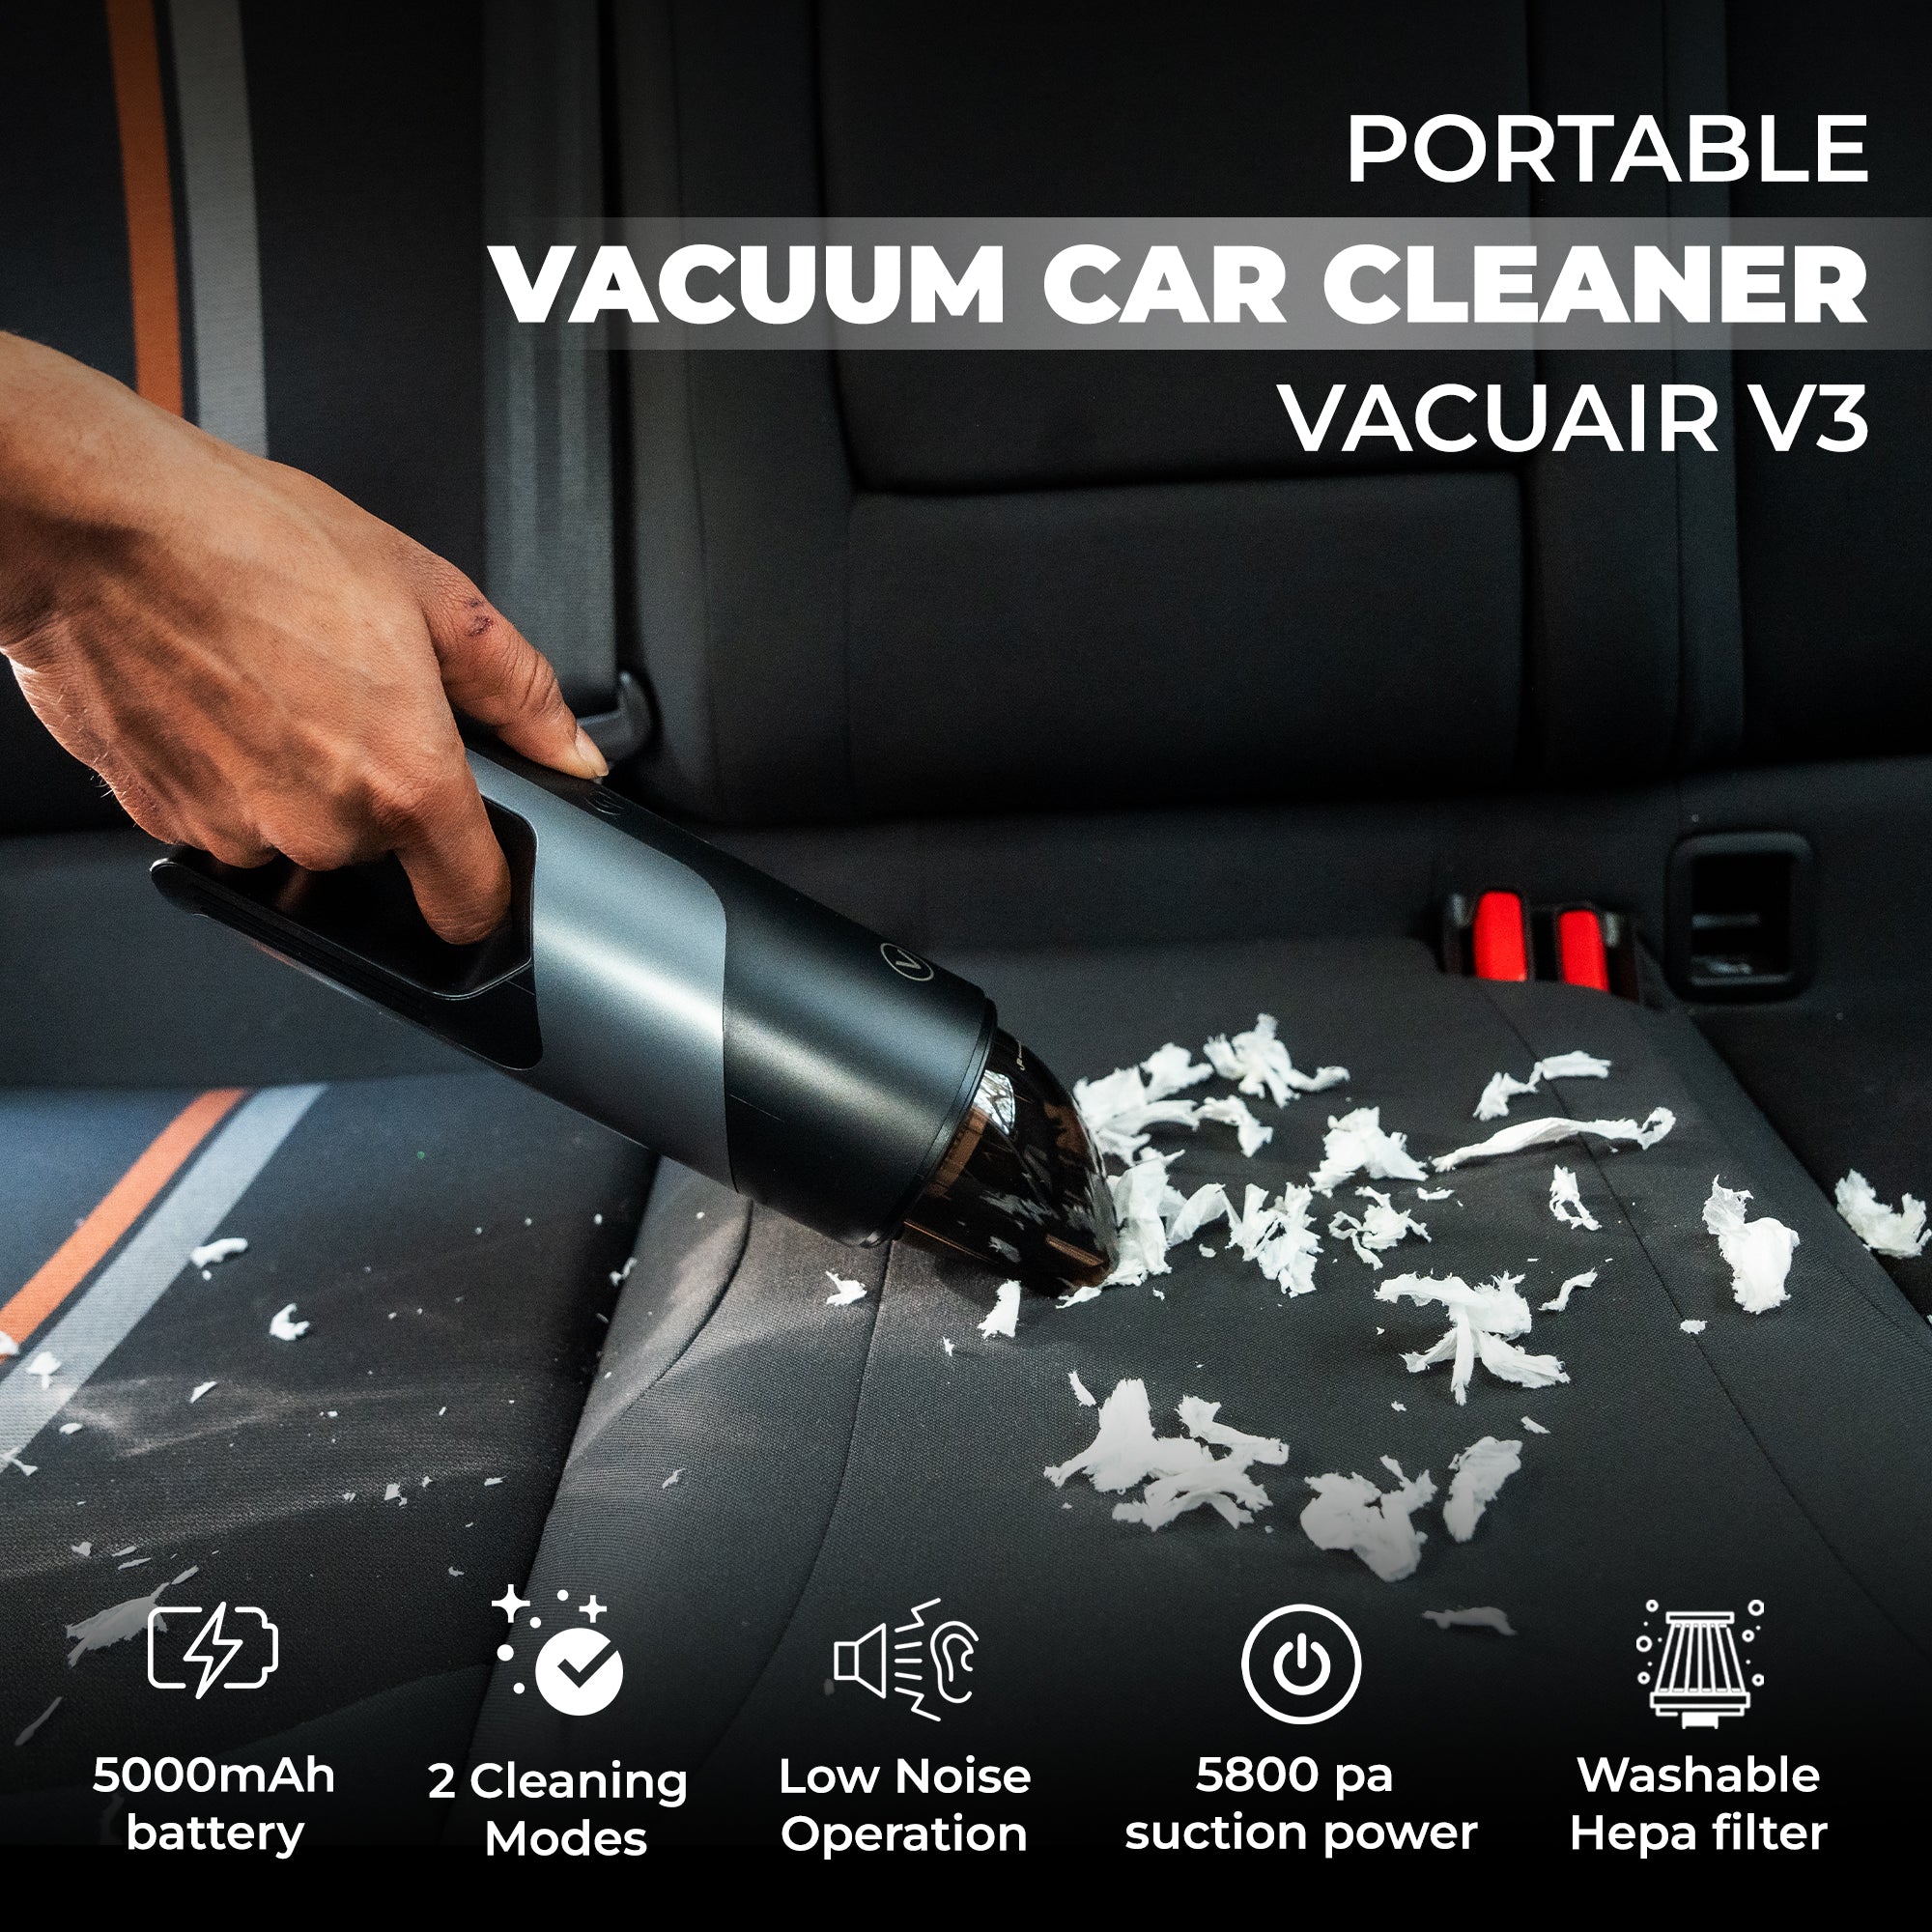 Vacuair V3 Portable & Cordless Vacuum Cleaner with 5800 Pa Suction Power | 5000 mAh Battery